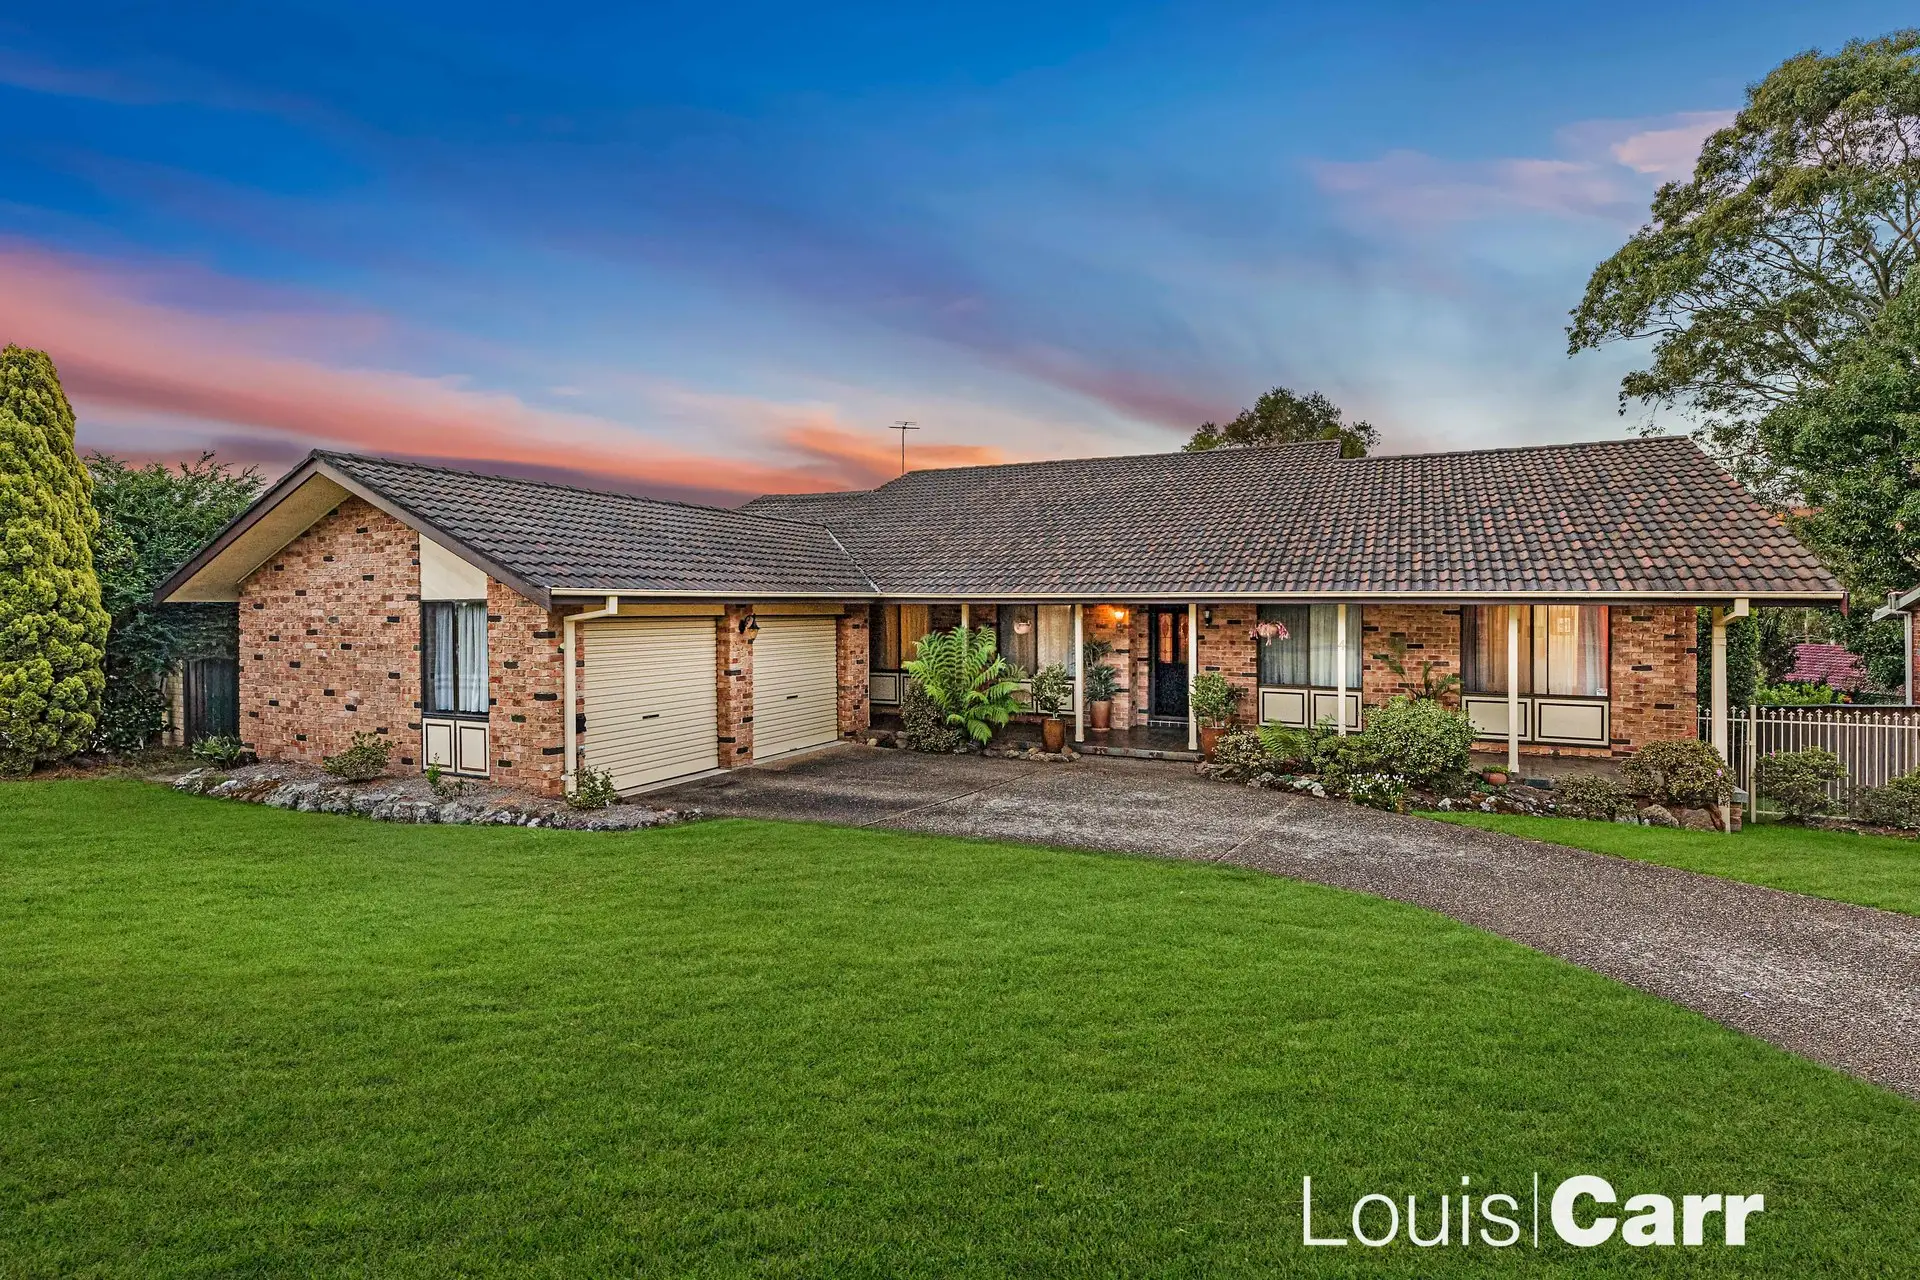 Photo #1: 4 Anne William Drive, West Pennant Hills - Sold by Louis Carr Real Estate